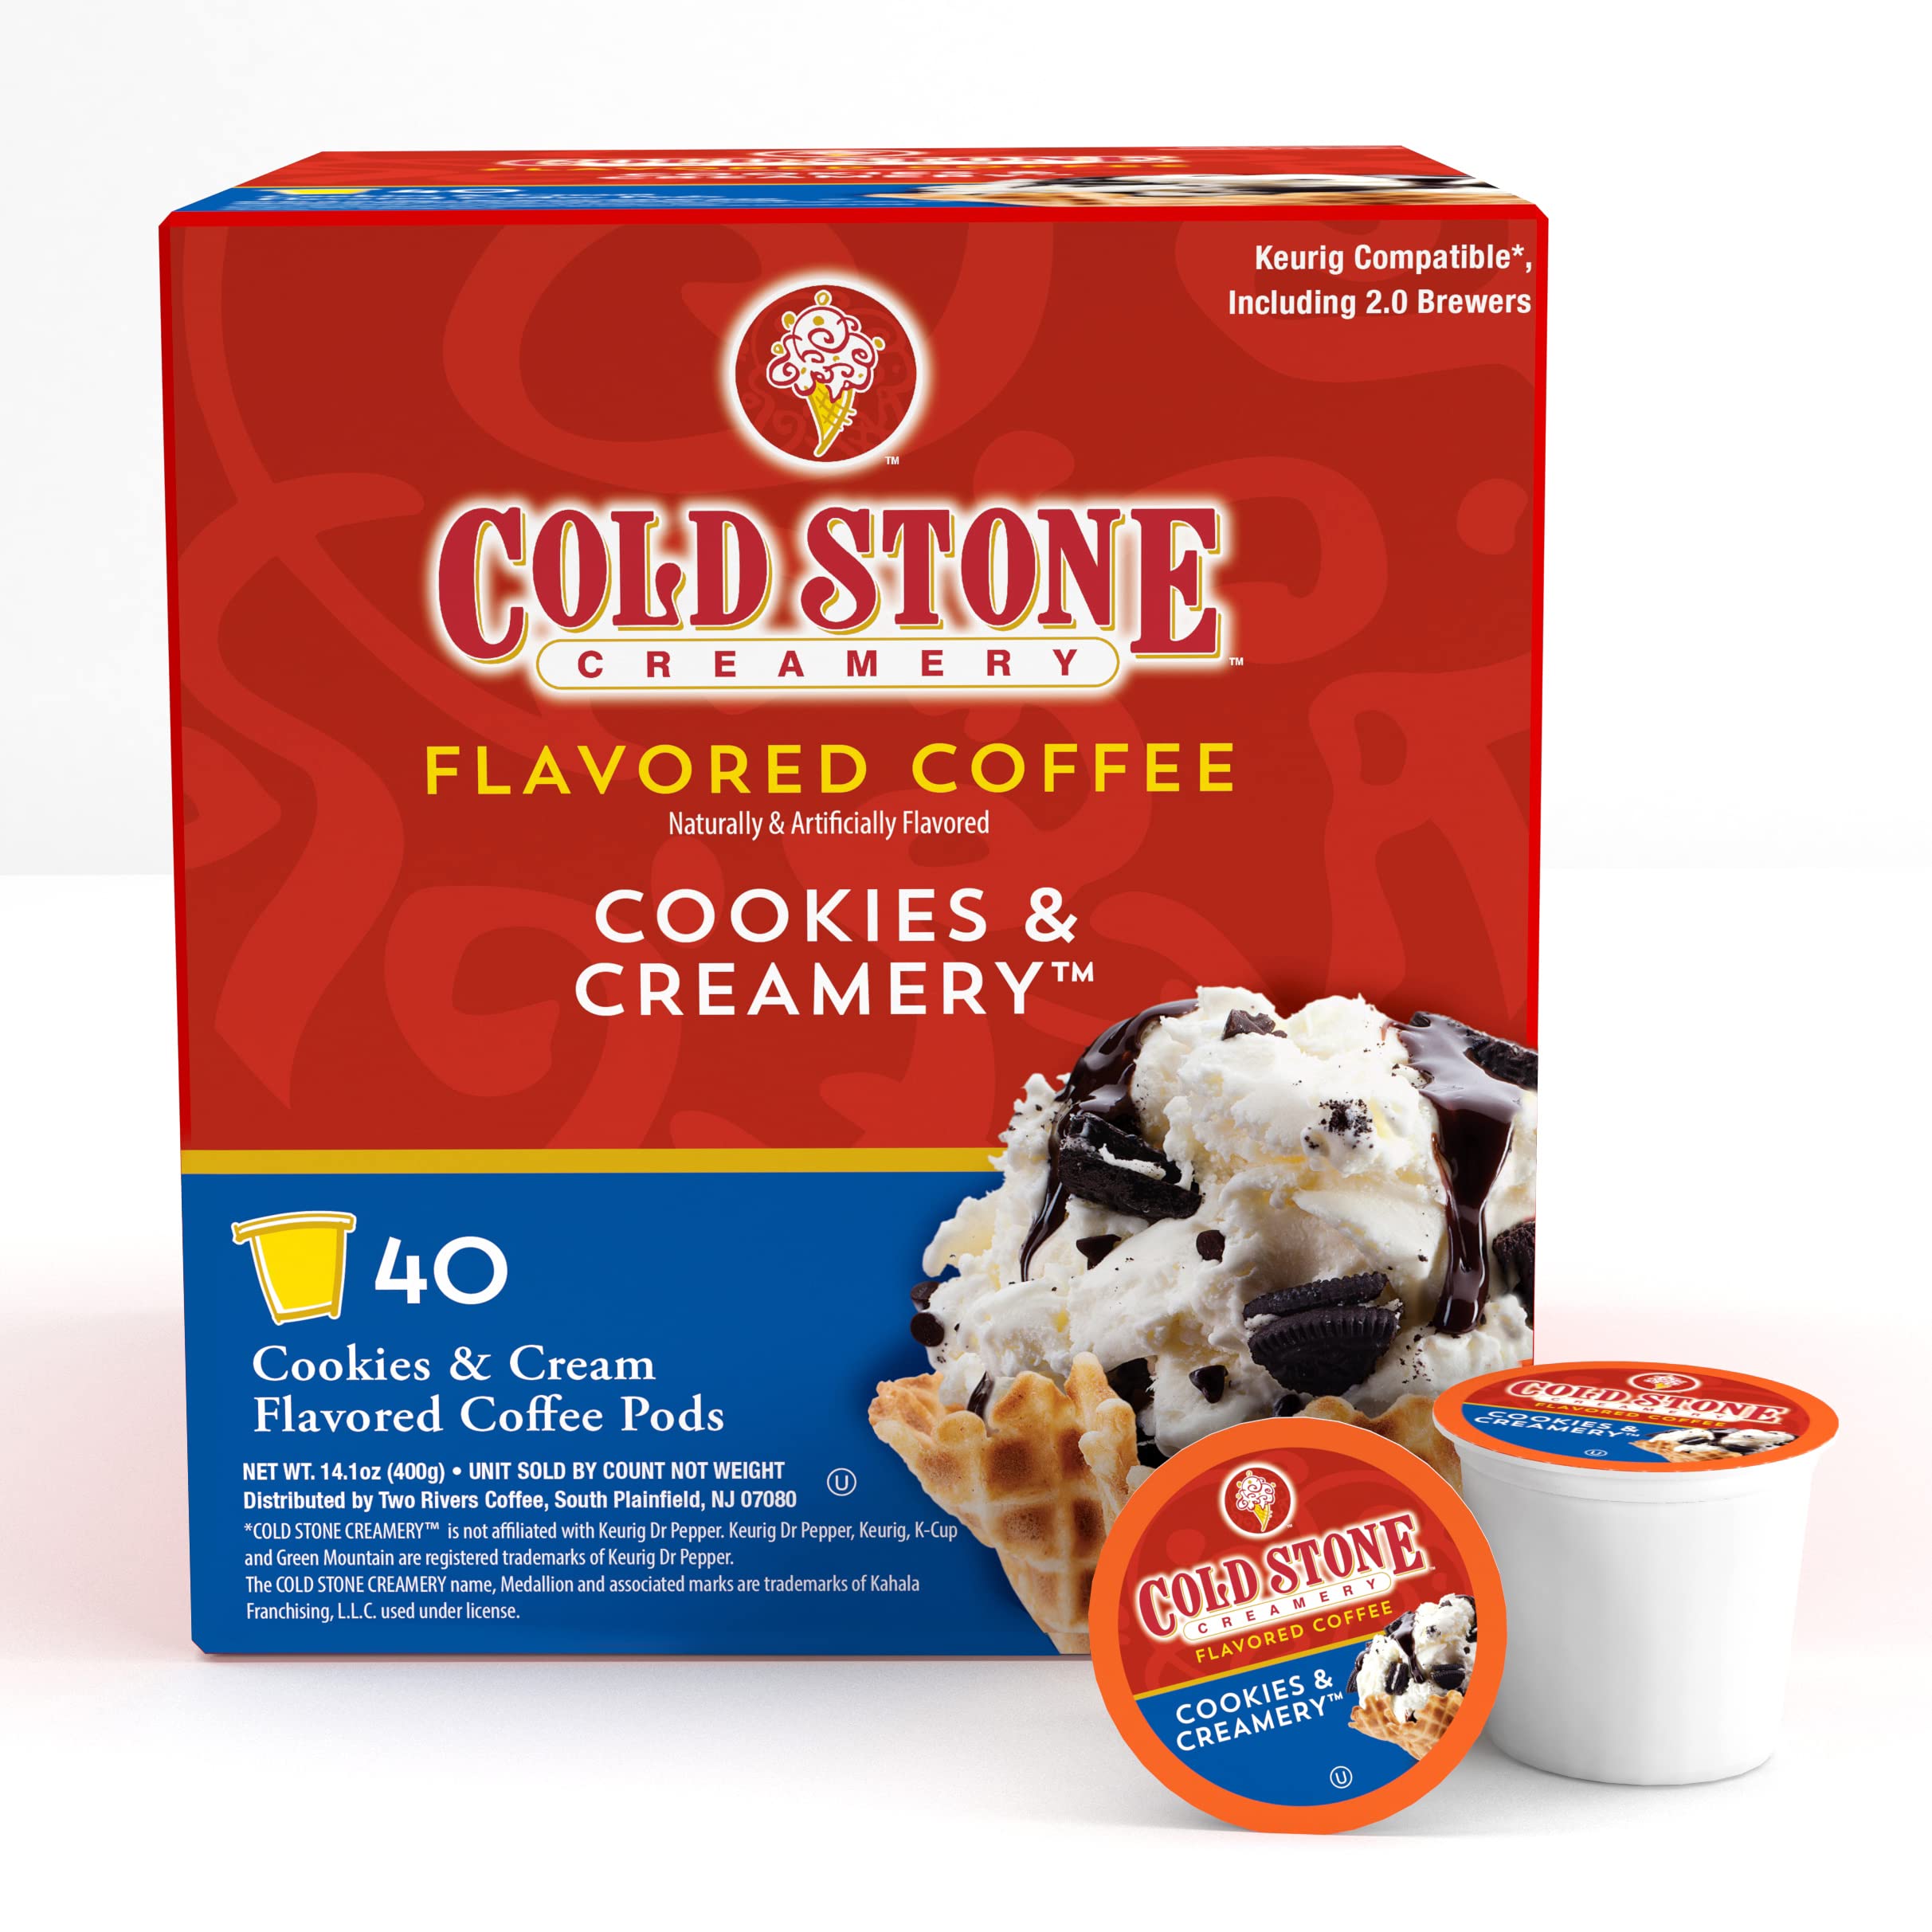 Sam's Club: Up to 30% Off Select Gift Cards: $30 Cold Stone Creamery